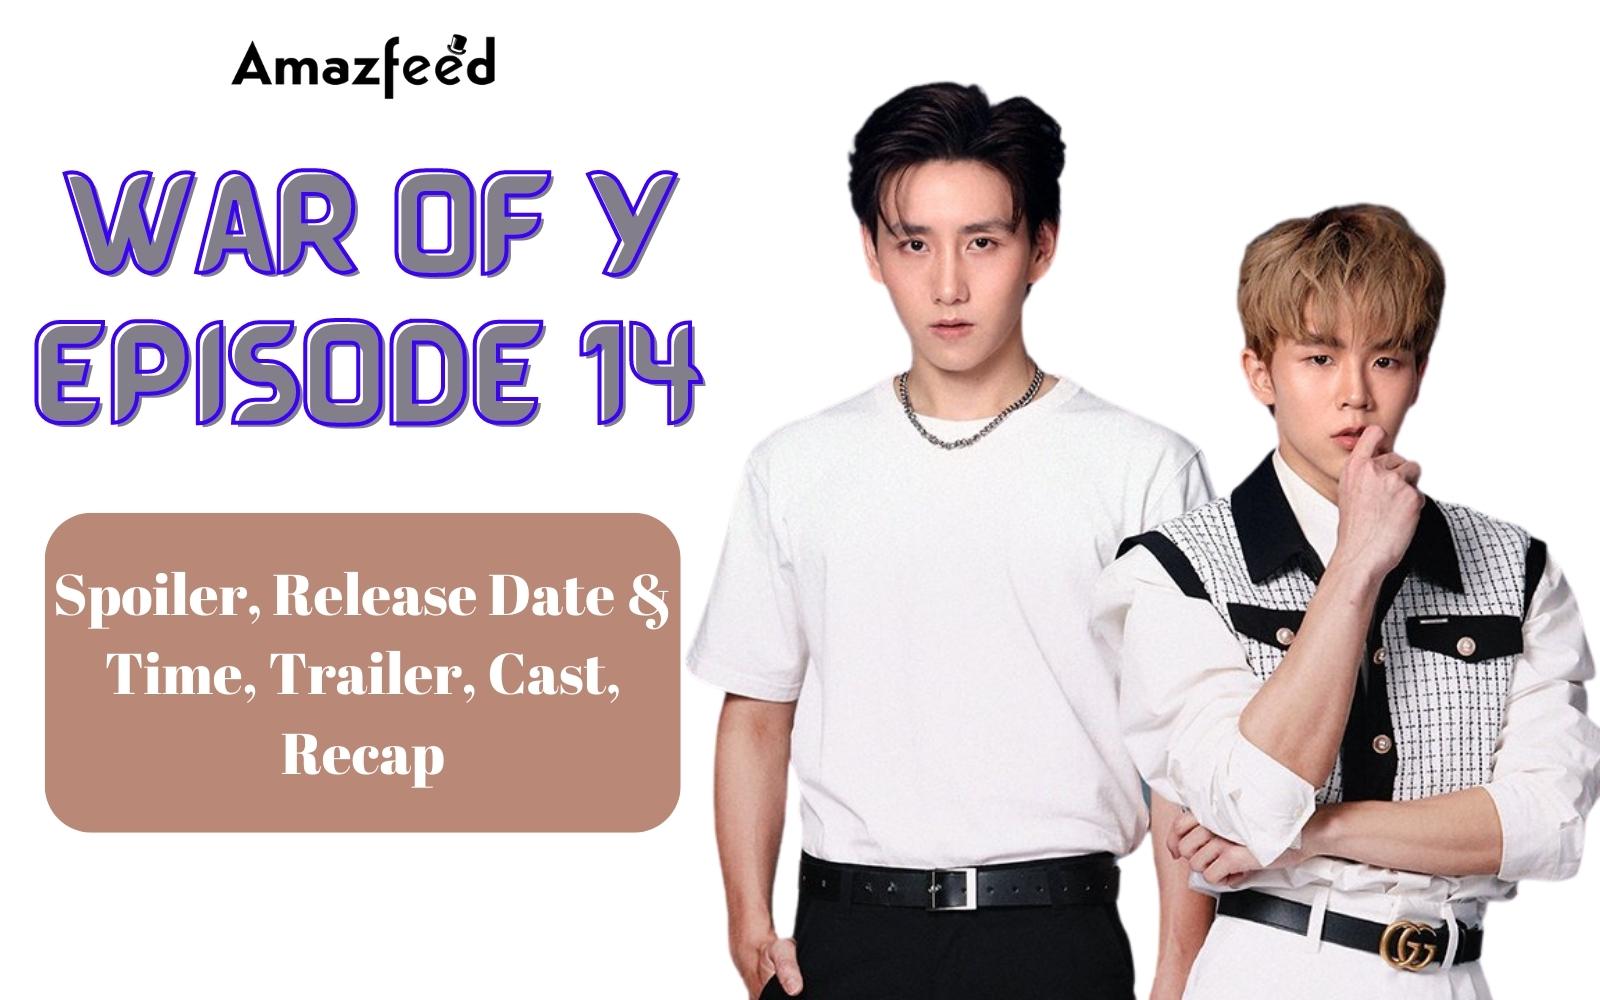 War of Y Episode 14 Spoiler, Release Date & Time, Trailer, Cast, Recap and Everything You Need to Know